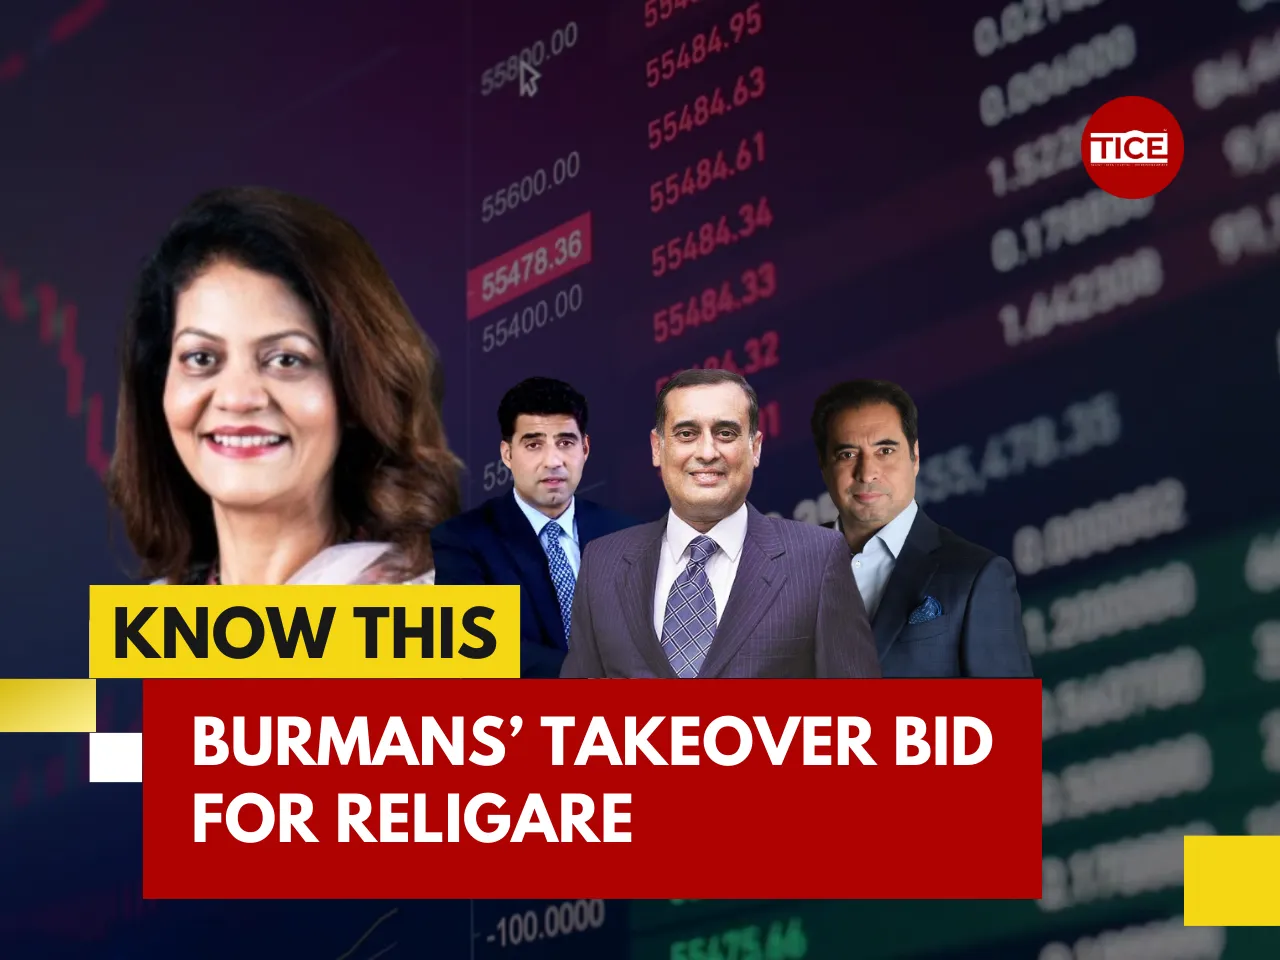 Religare Controversy: Burmans' Launch Big Takeover Bid for Religare!